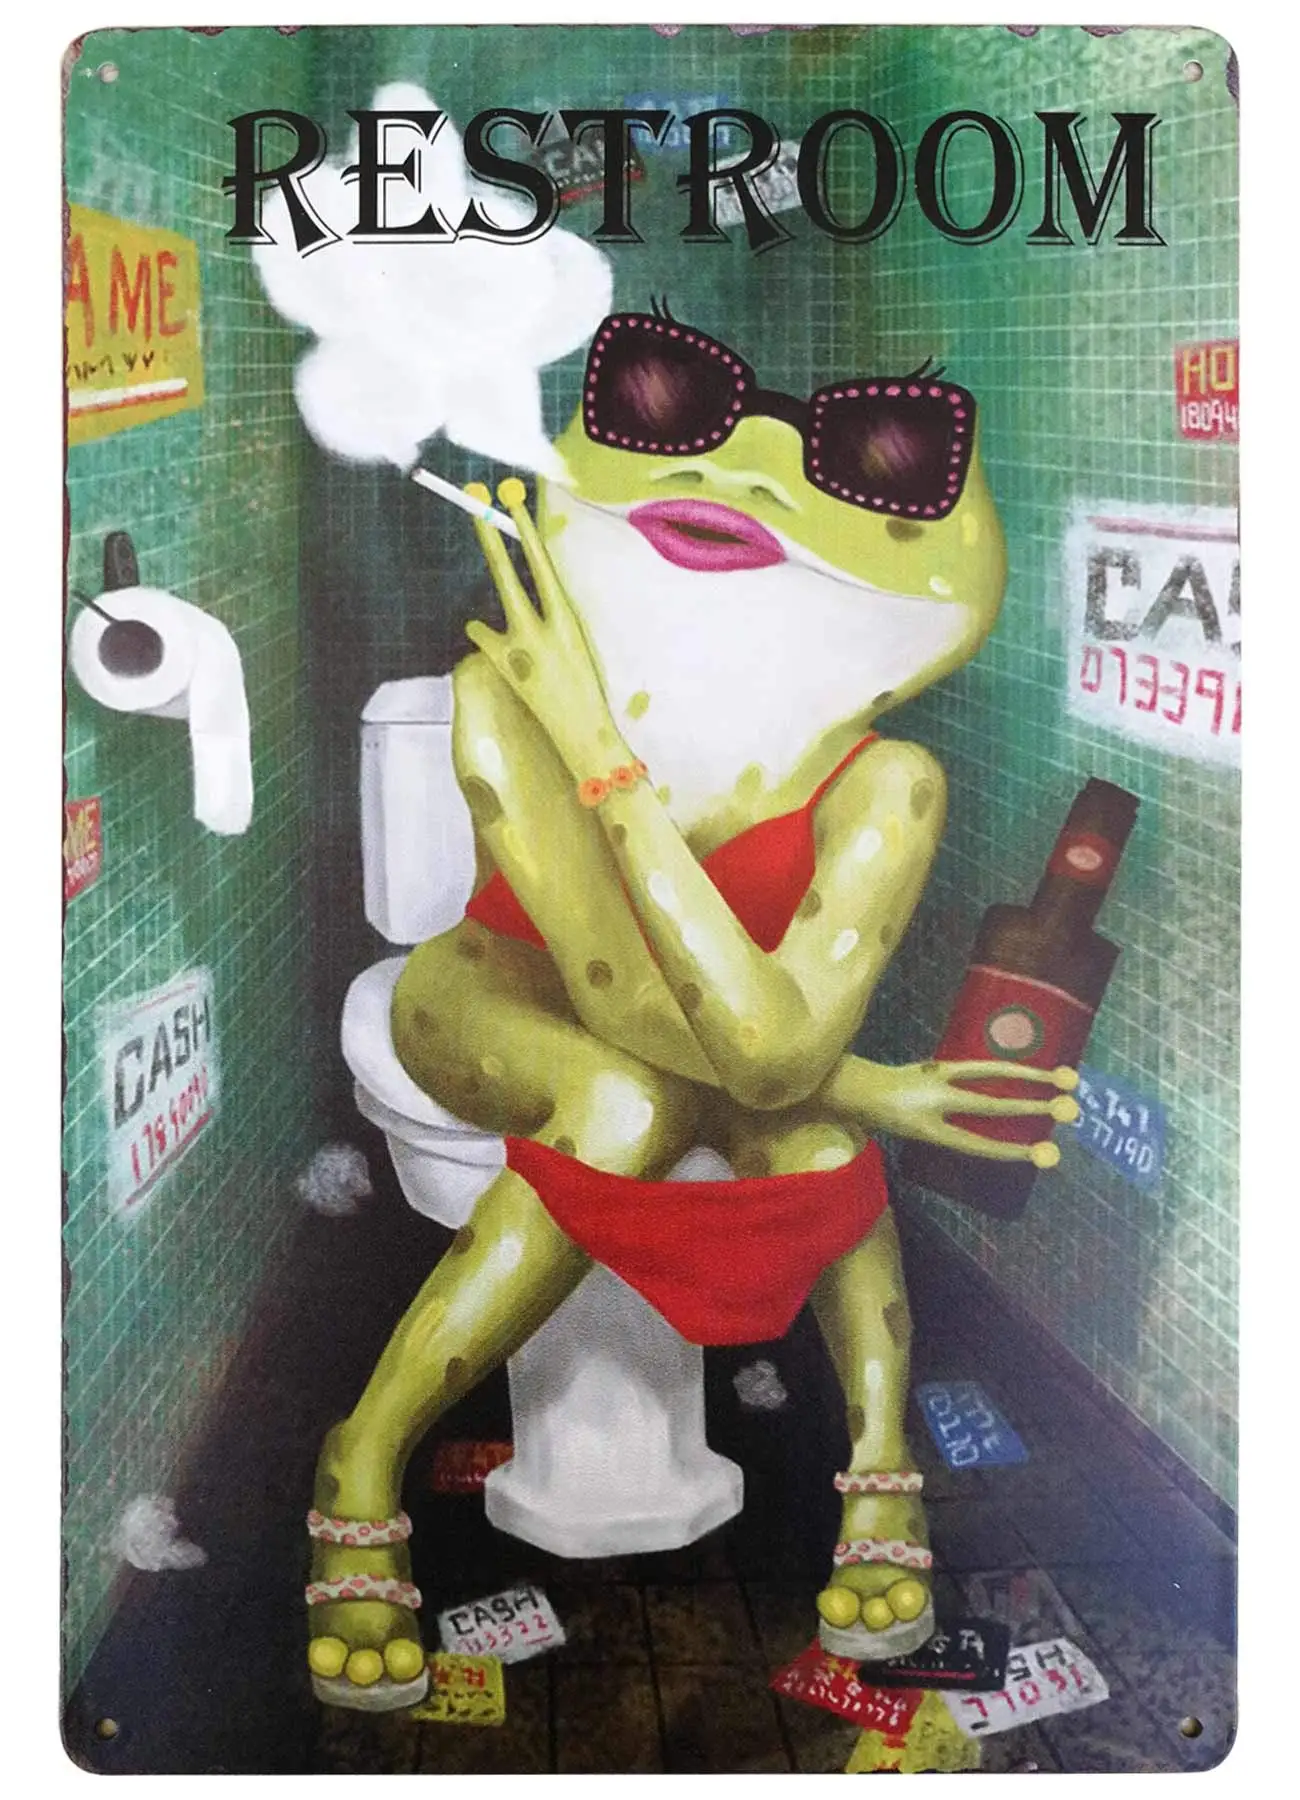 

Funny Frog Smoking Drinking on Toilet Restroom Sign for Bar Pub Bedroom Decor Bathroom Art Wall Plaque 8X12 Inches